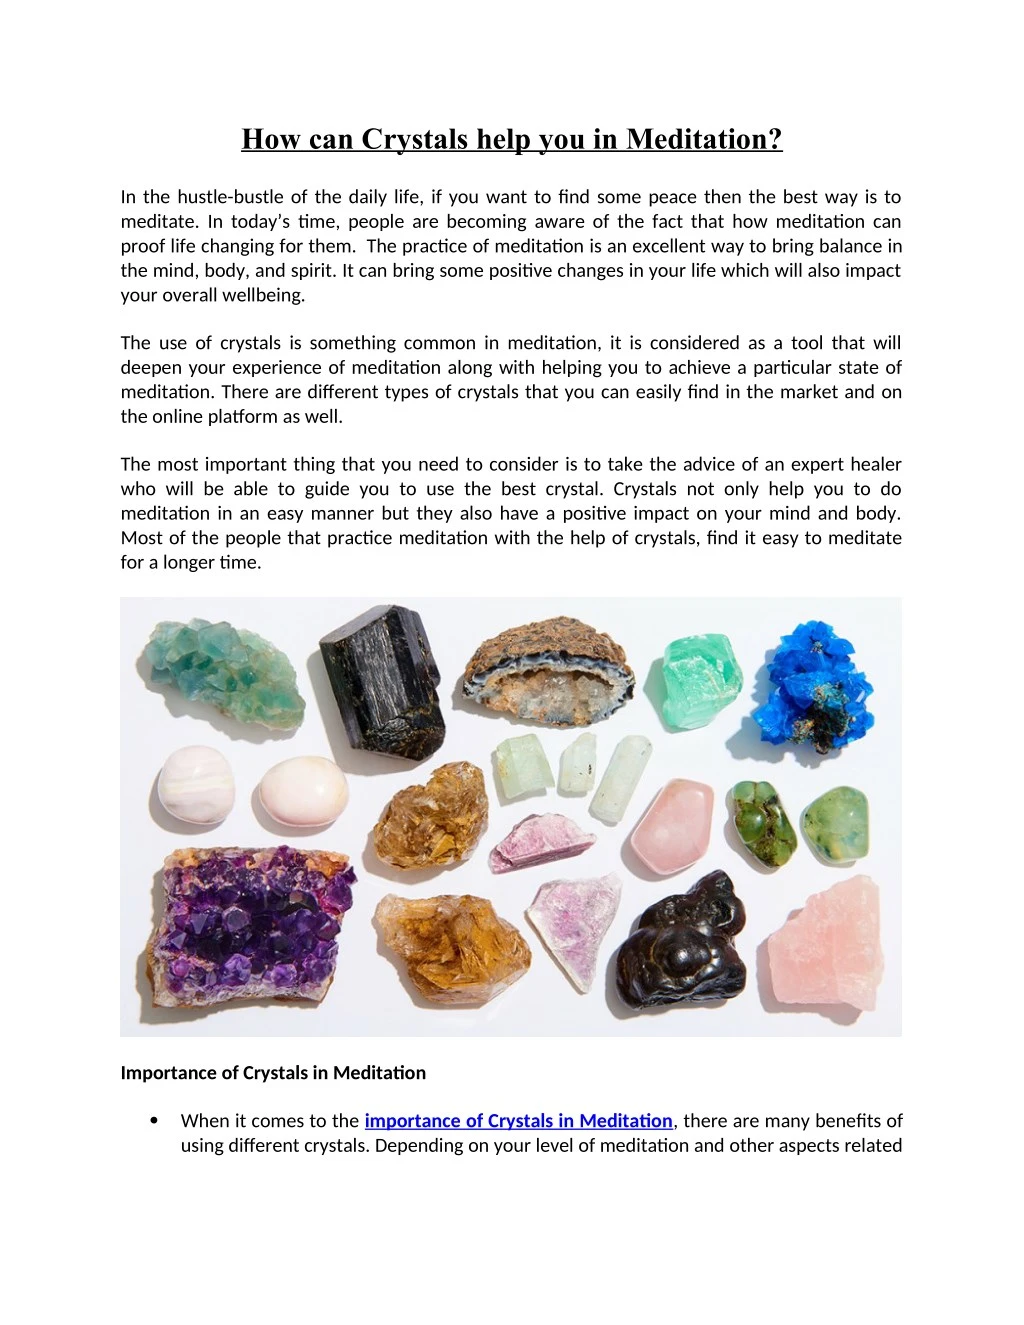 how can crystals help you in meditation